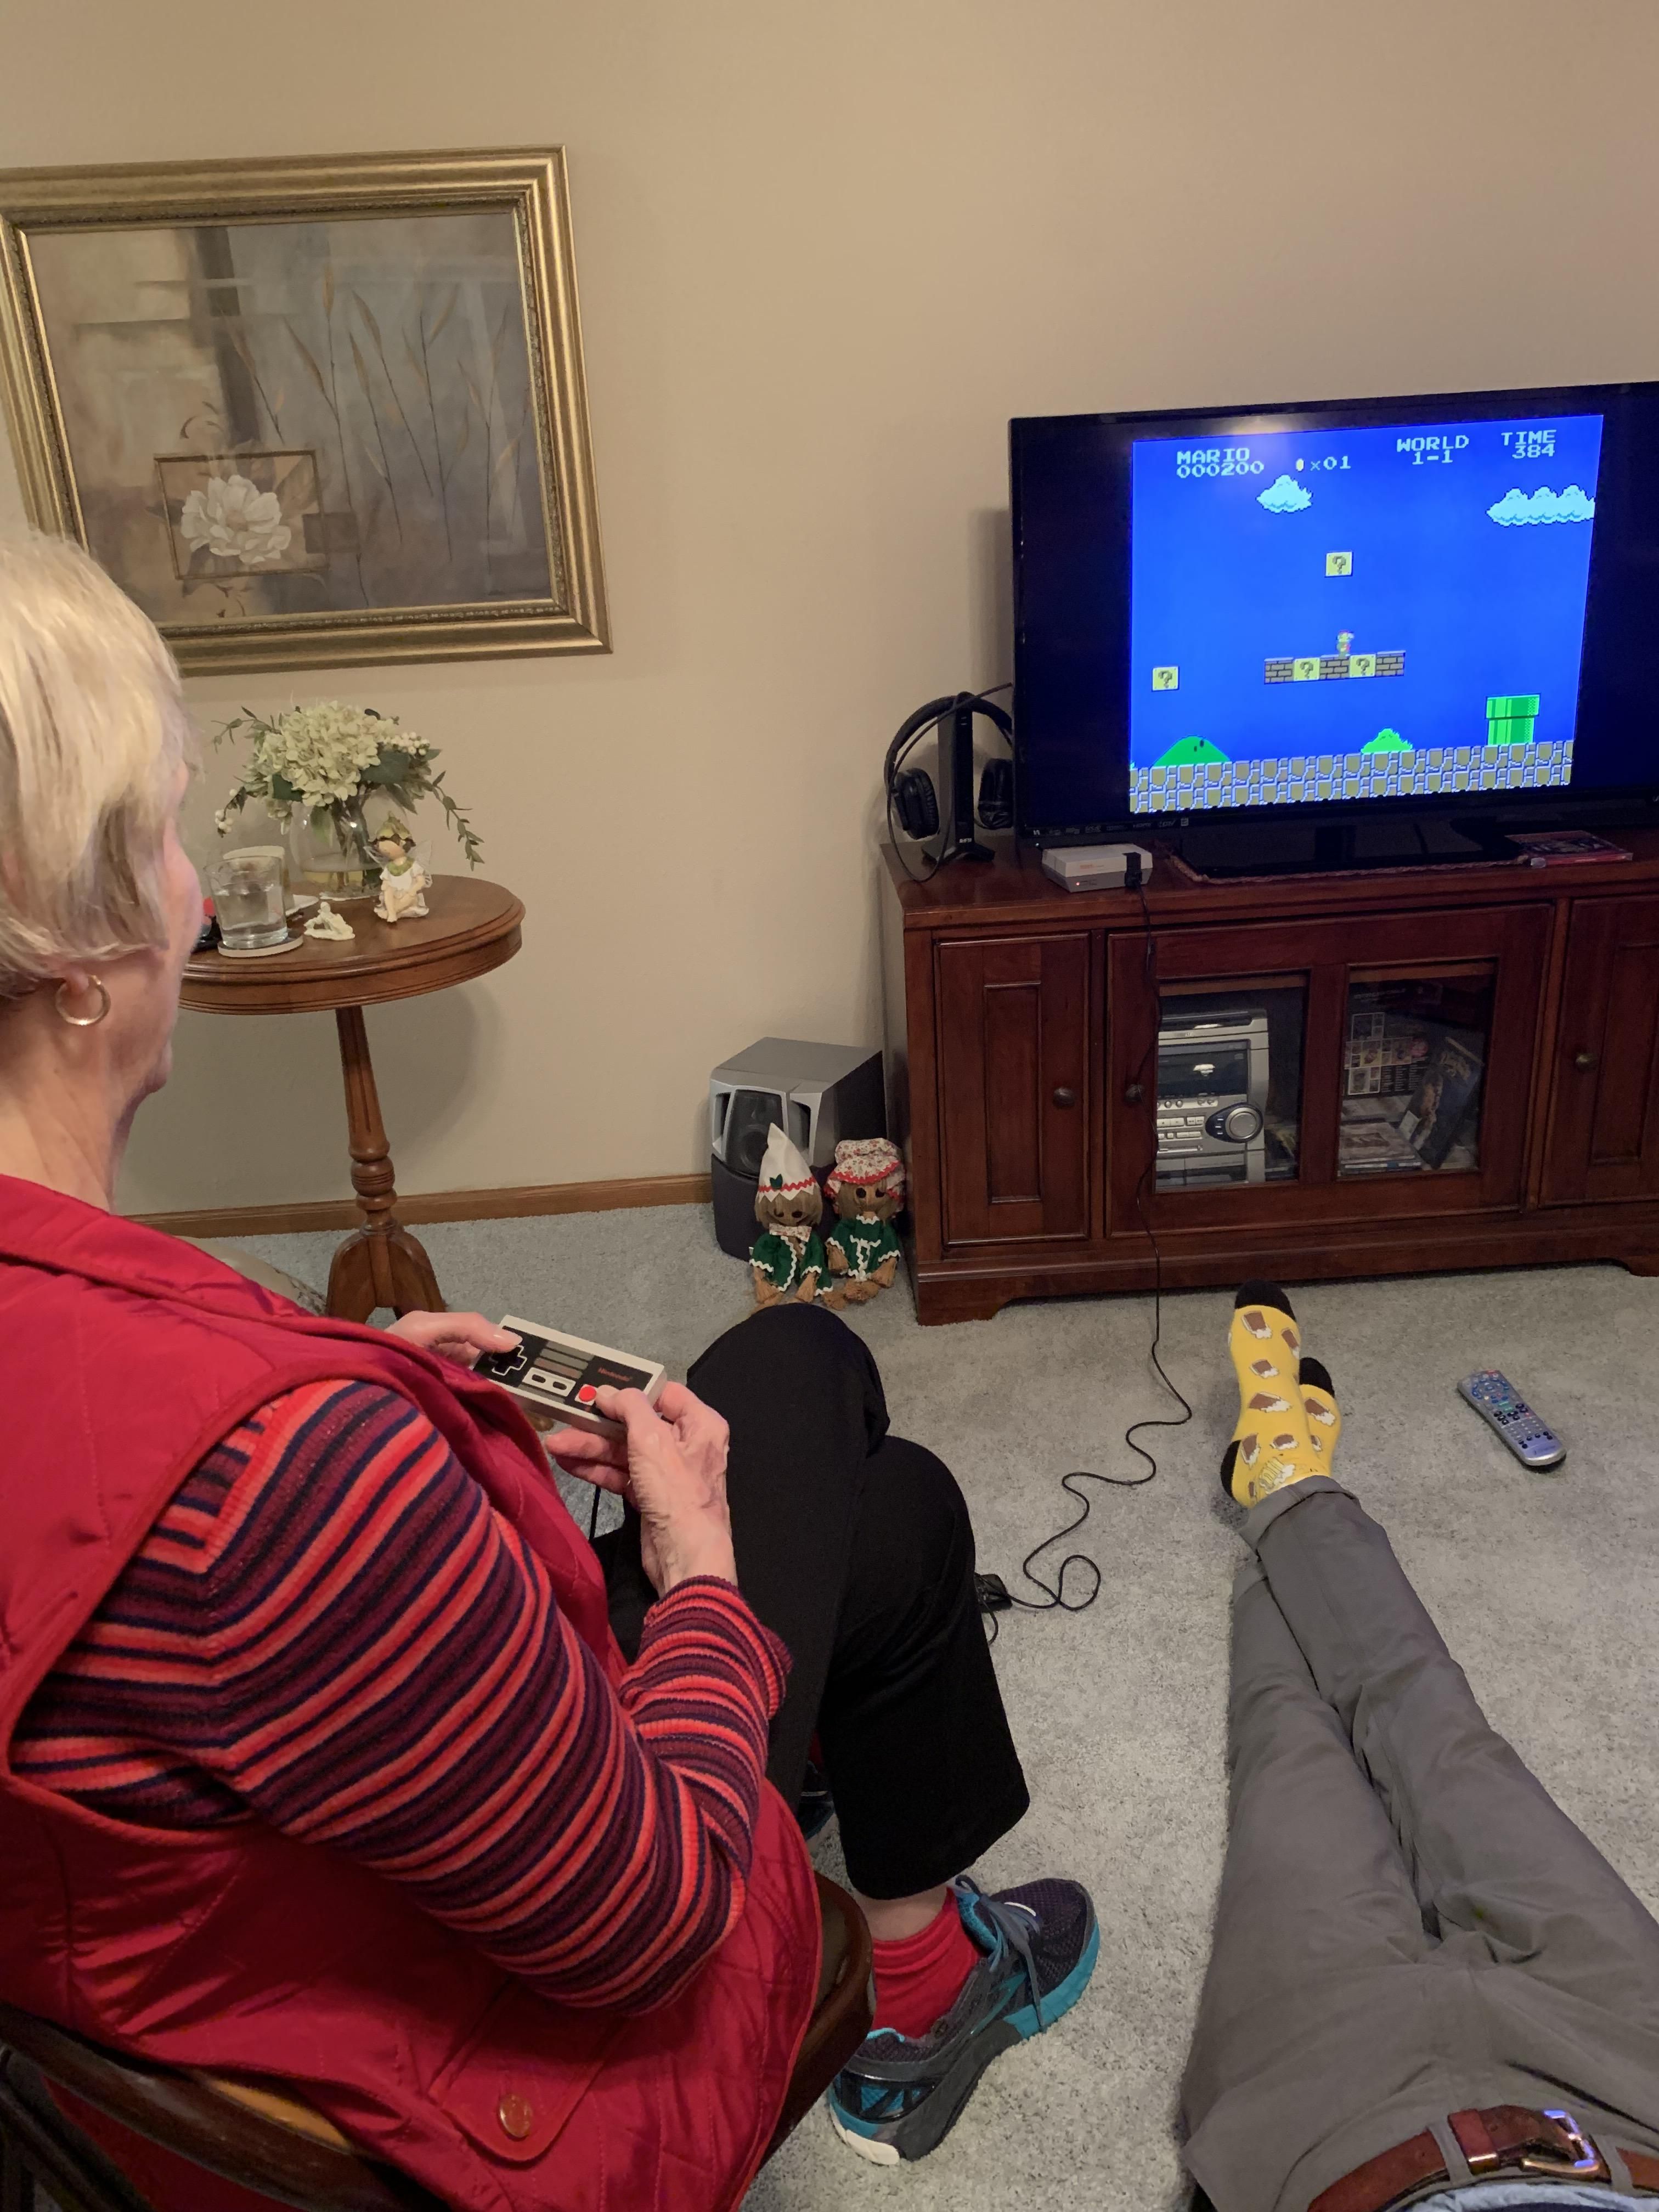 My Grandma asked for a Classic Nintendo for Christmas because she read that playing will, “improve her memory.”